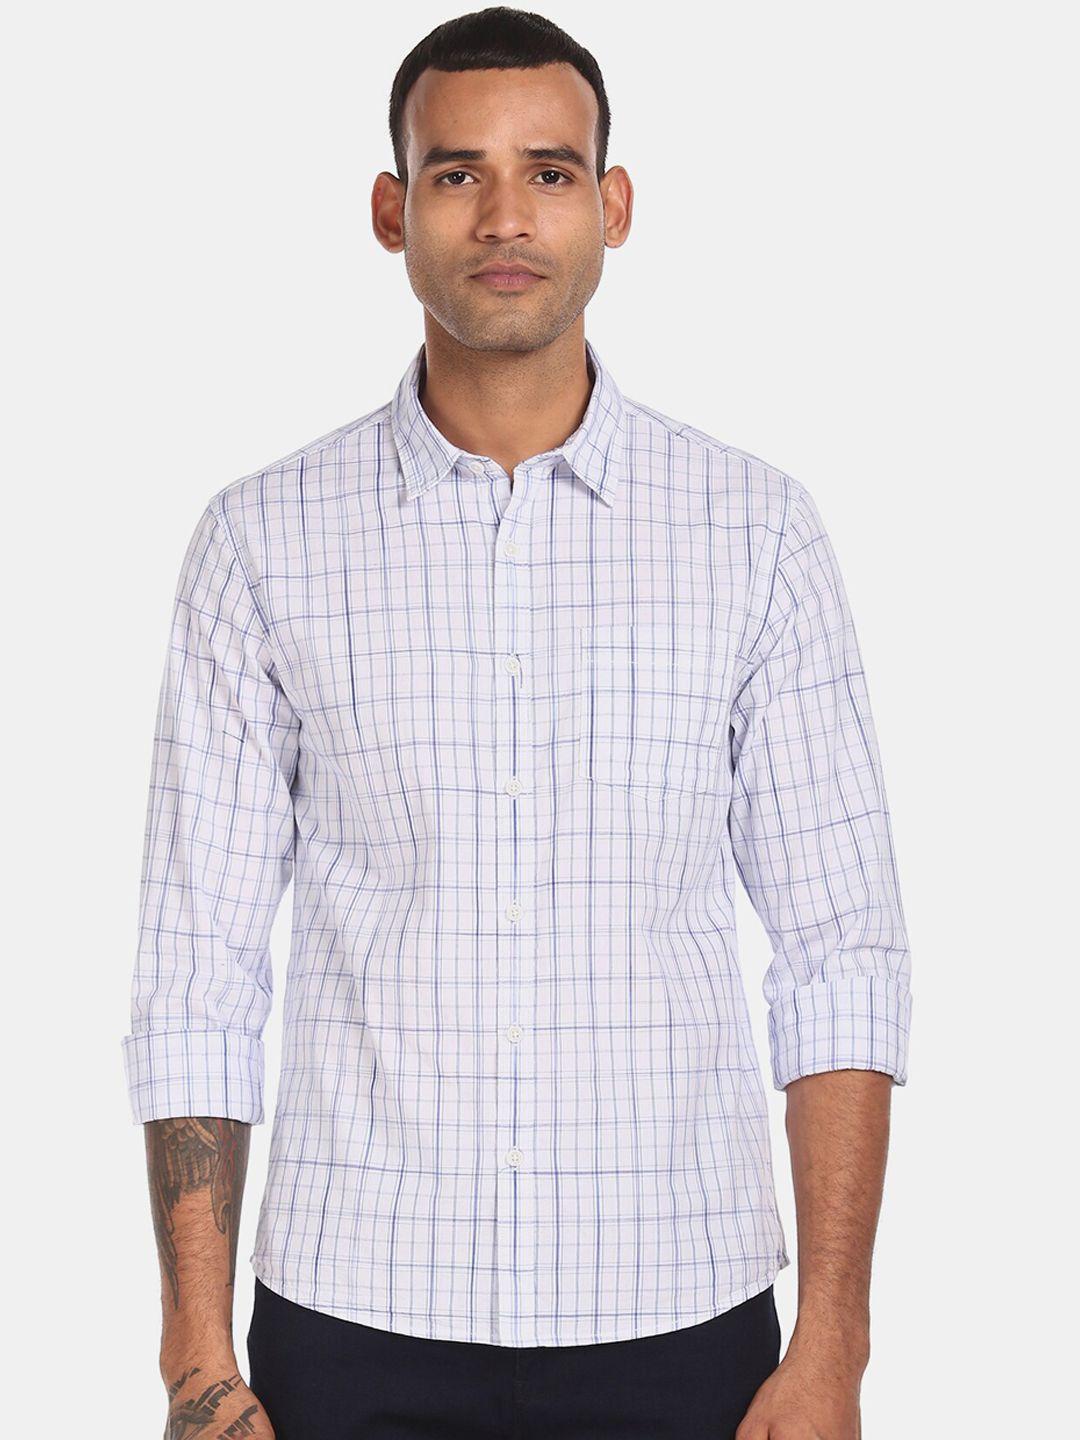 ruggers-men-white-cotton-checked-regular-fit-casual-shirt